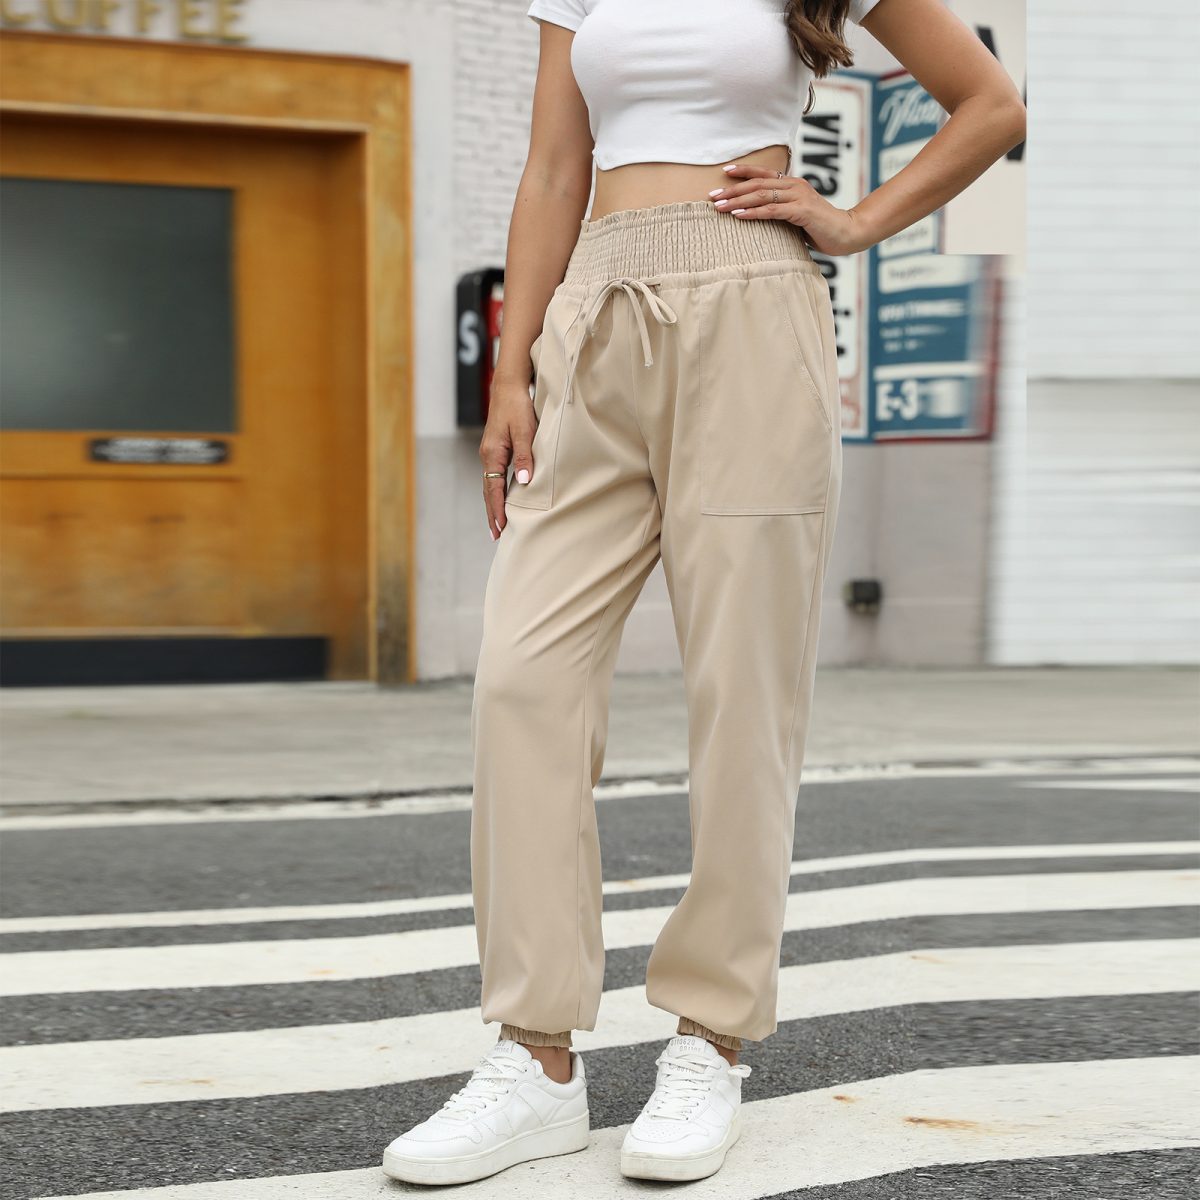 Elastic Solid Color Ankle Banded High Waist Lace Up Pants in Pants